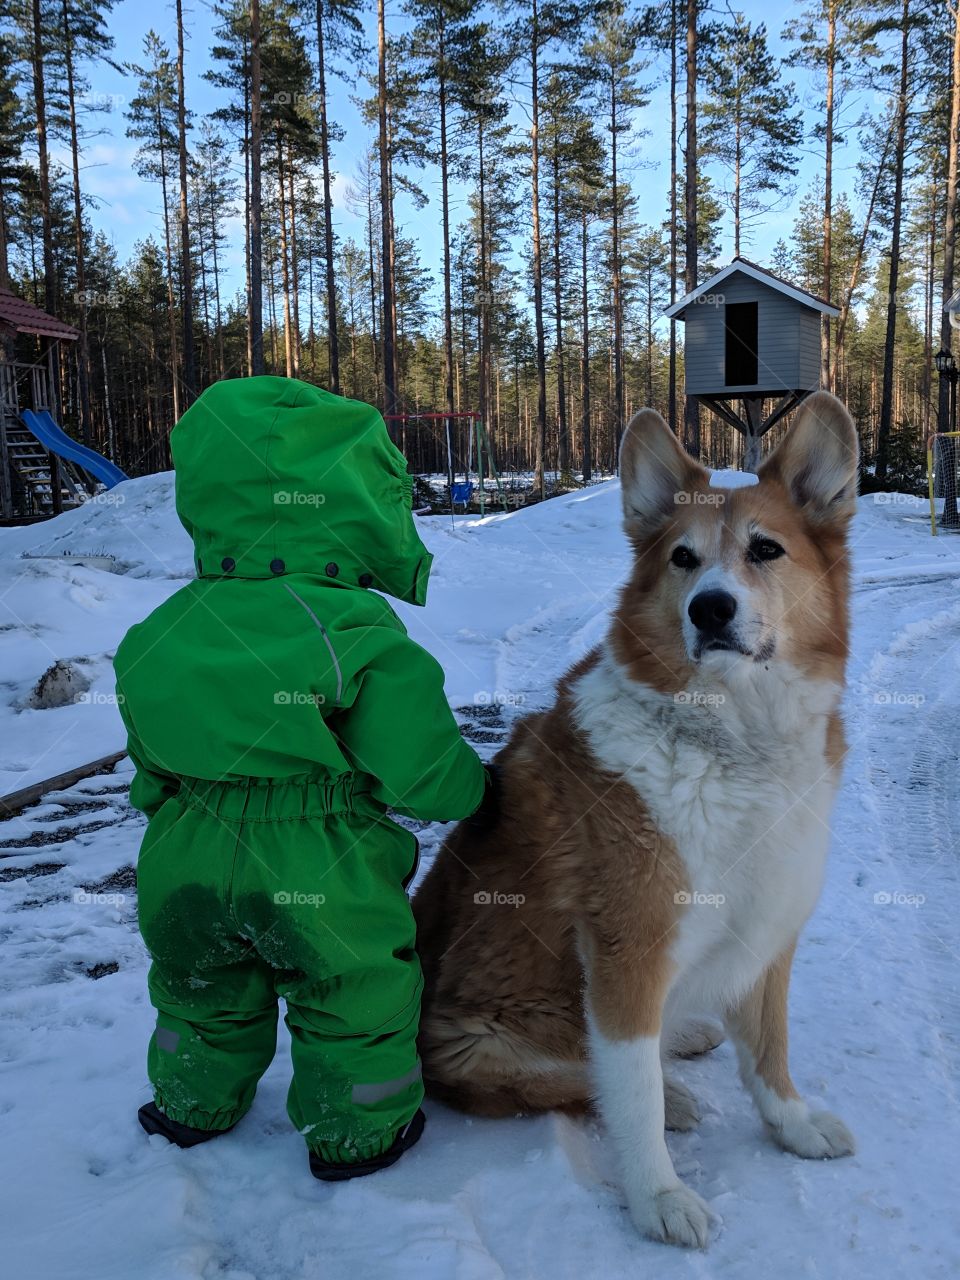 Dog helping the kid to stand up, best friend and protector